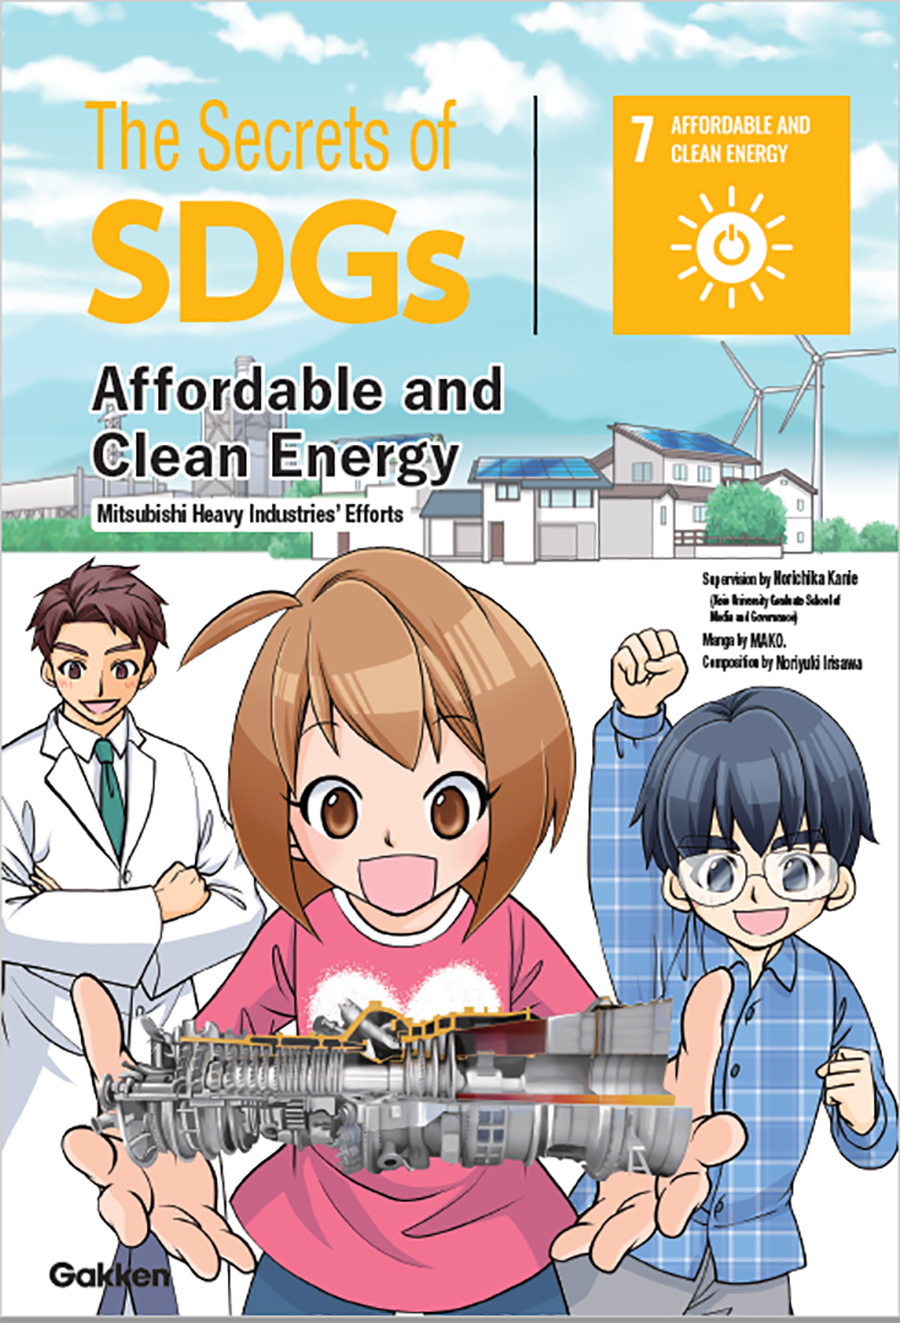 The Secrets of SDGs Affordable and Clean Energy Mitsubishi Heavy Industries' Efforts